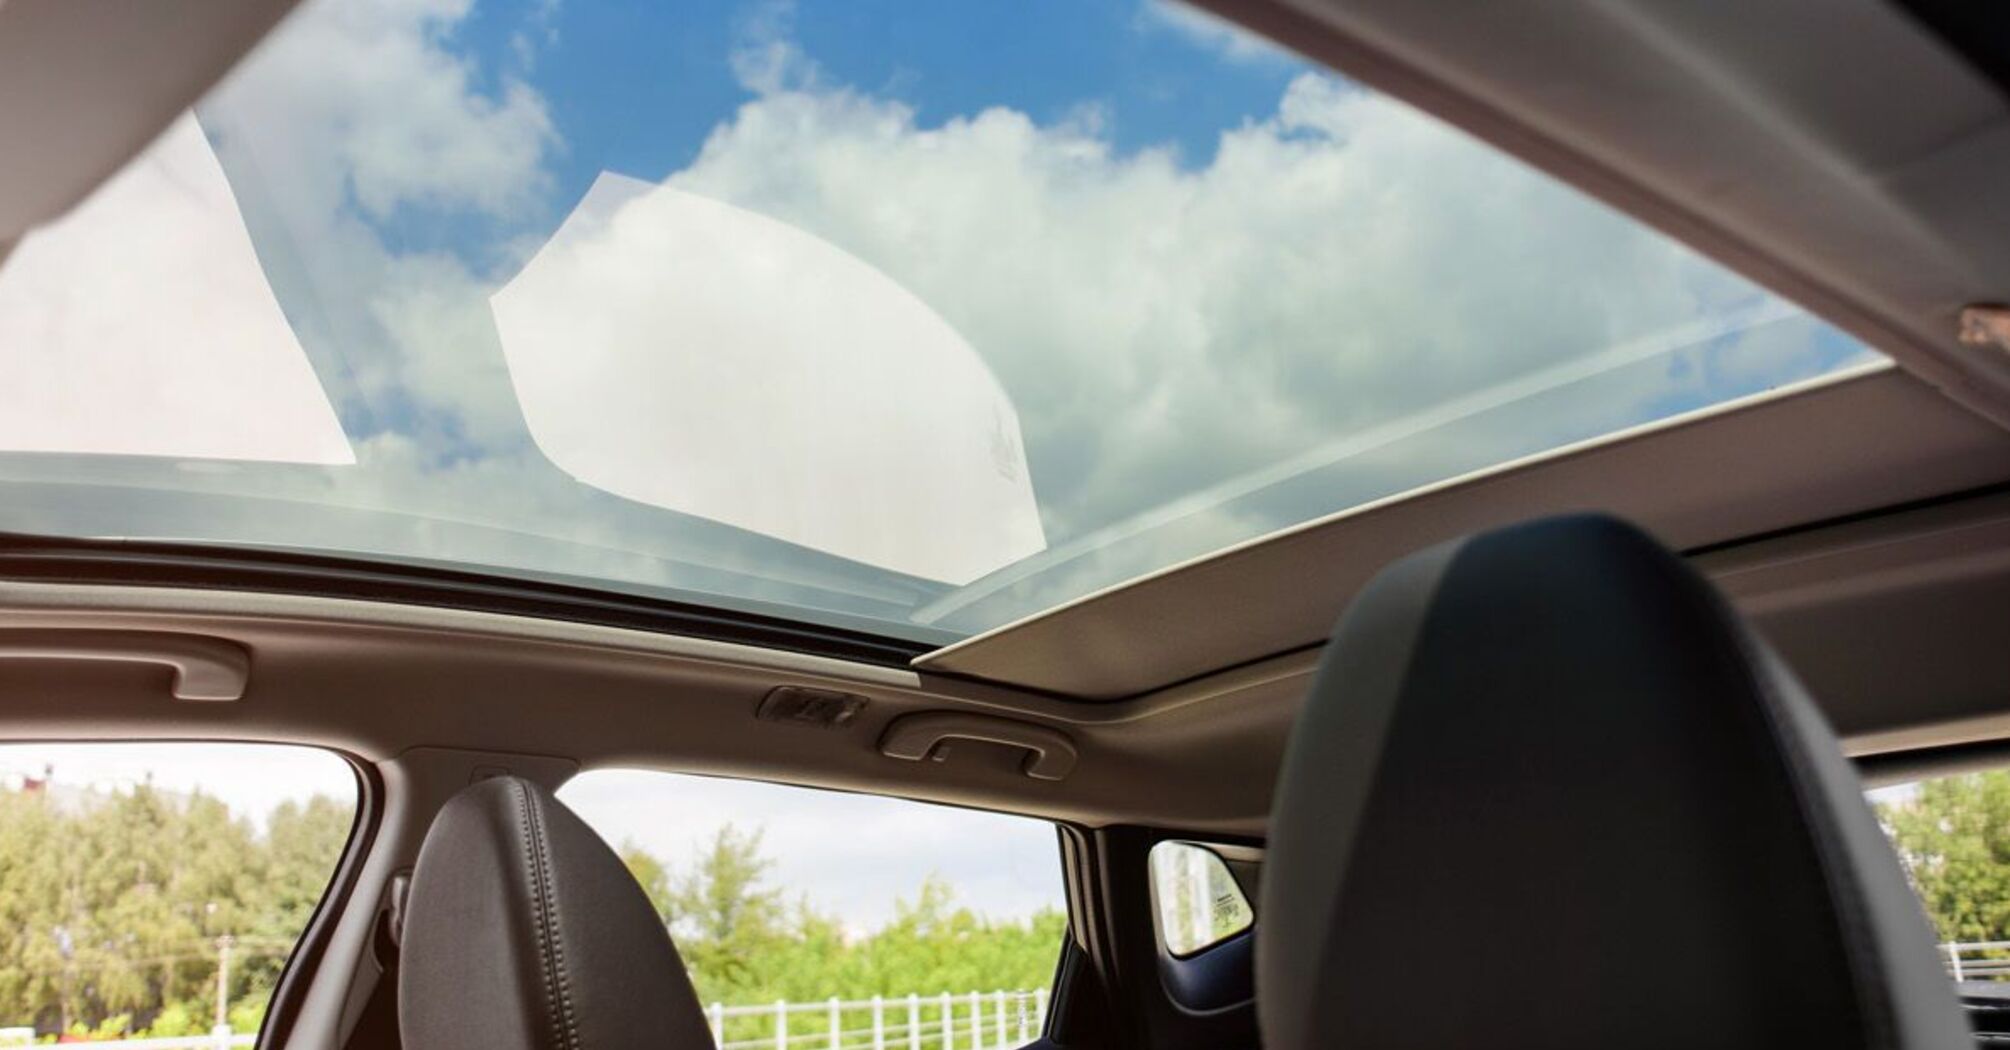 Advantages and disadvantages of cars with a panoramic roof